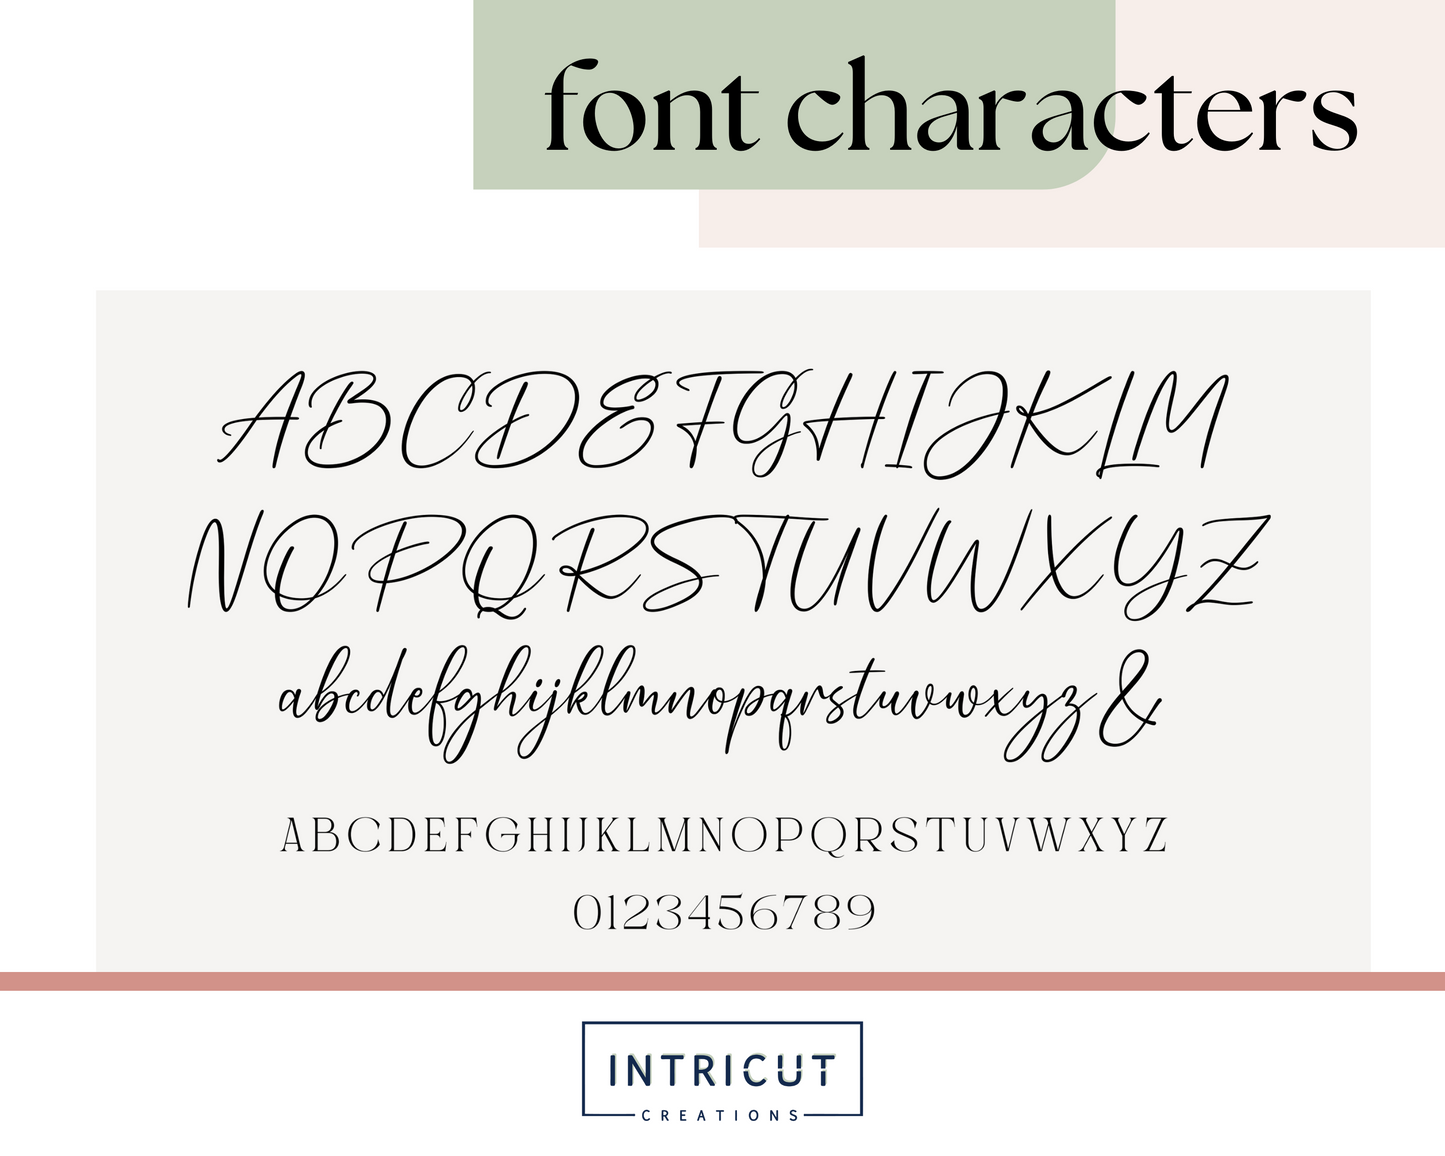 every font character for a visual of what the letters look like